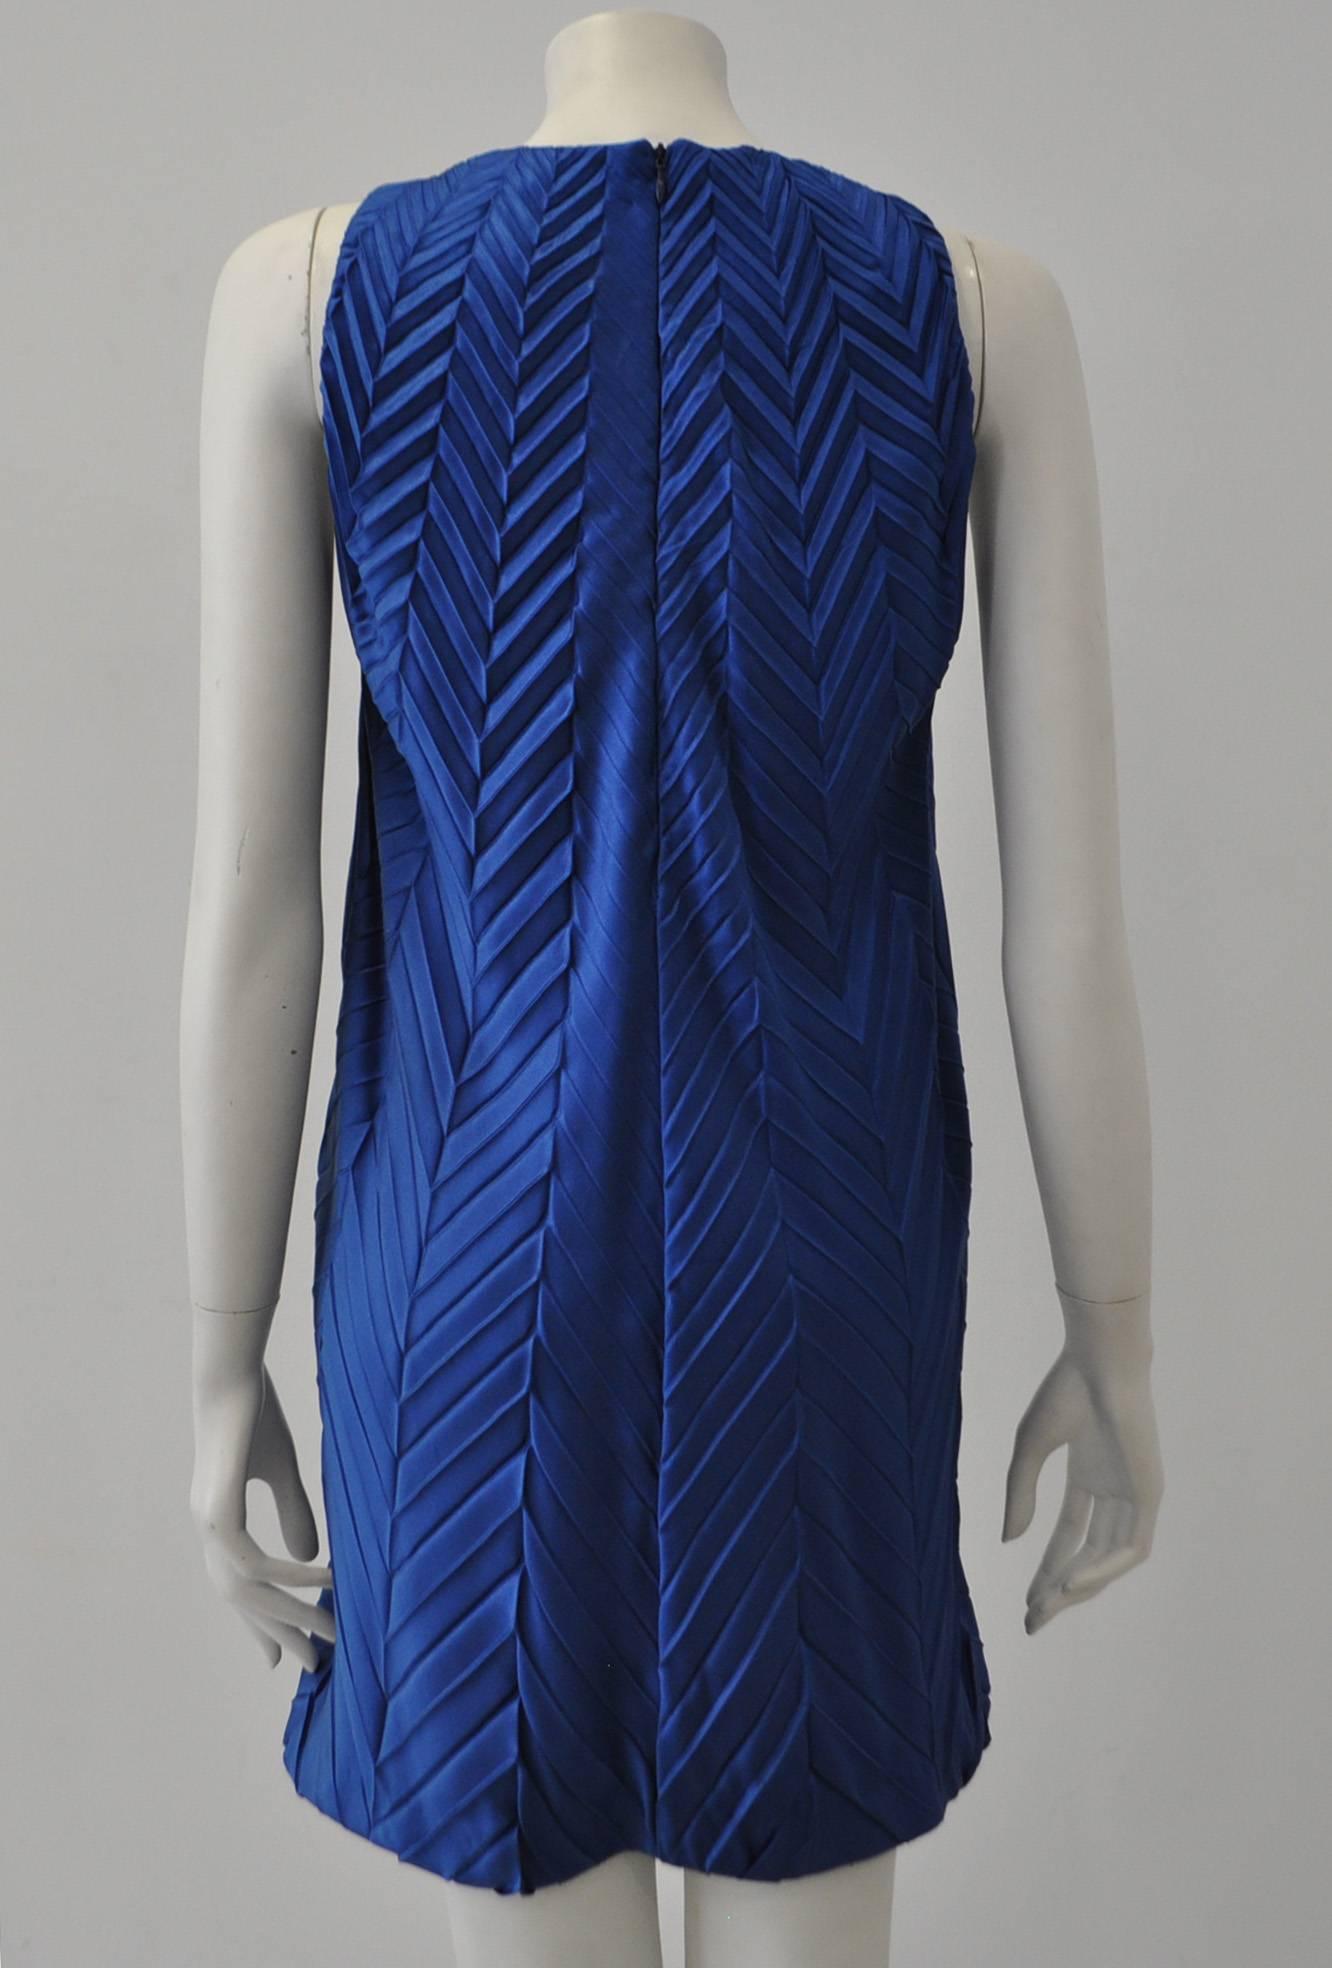 Blue Extremely Rare Atelier Versace Wrinkled Silk Plisse Punk Babydoll Cocktail Dress For Sale